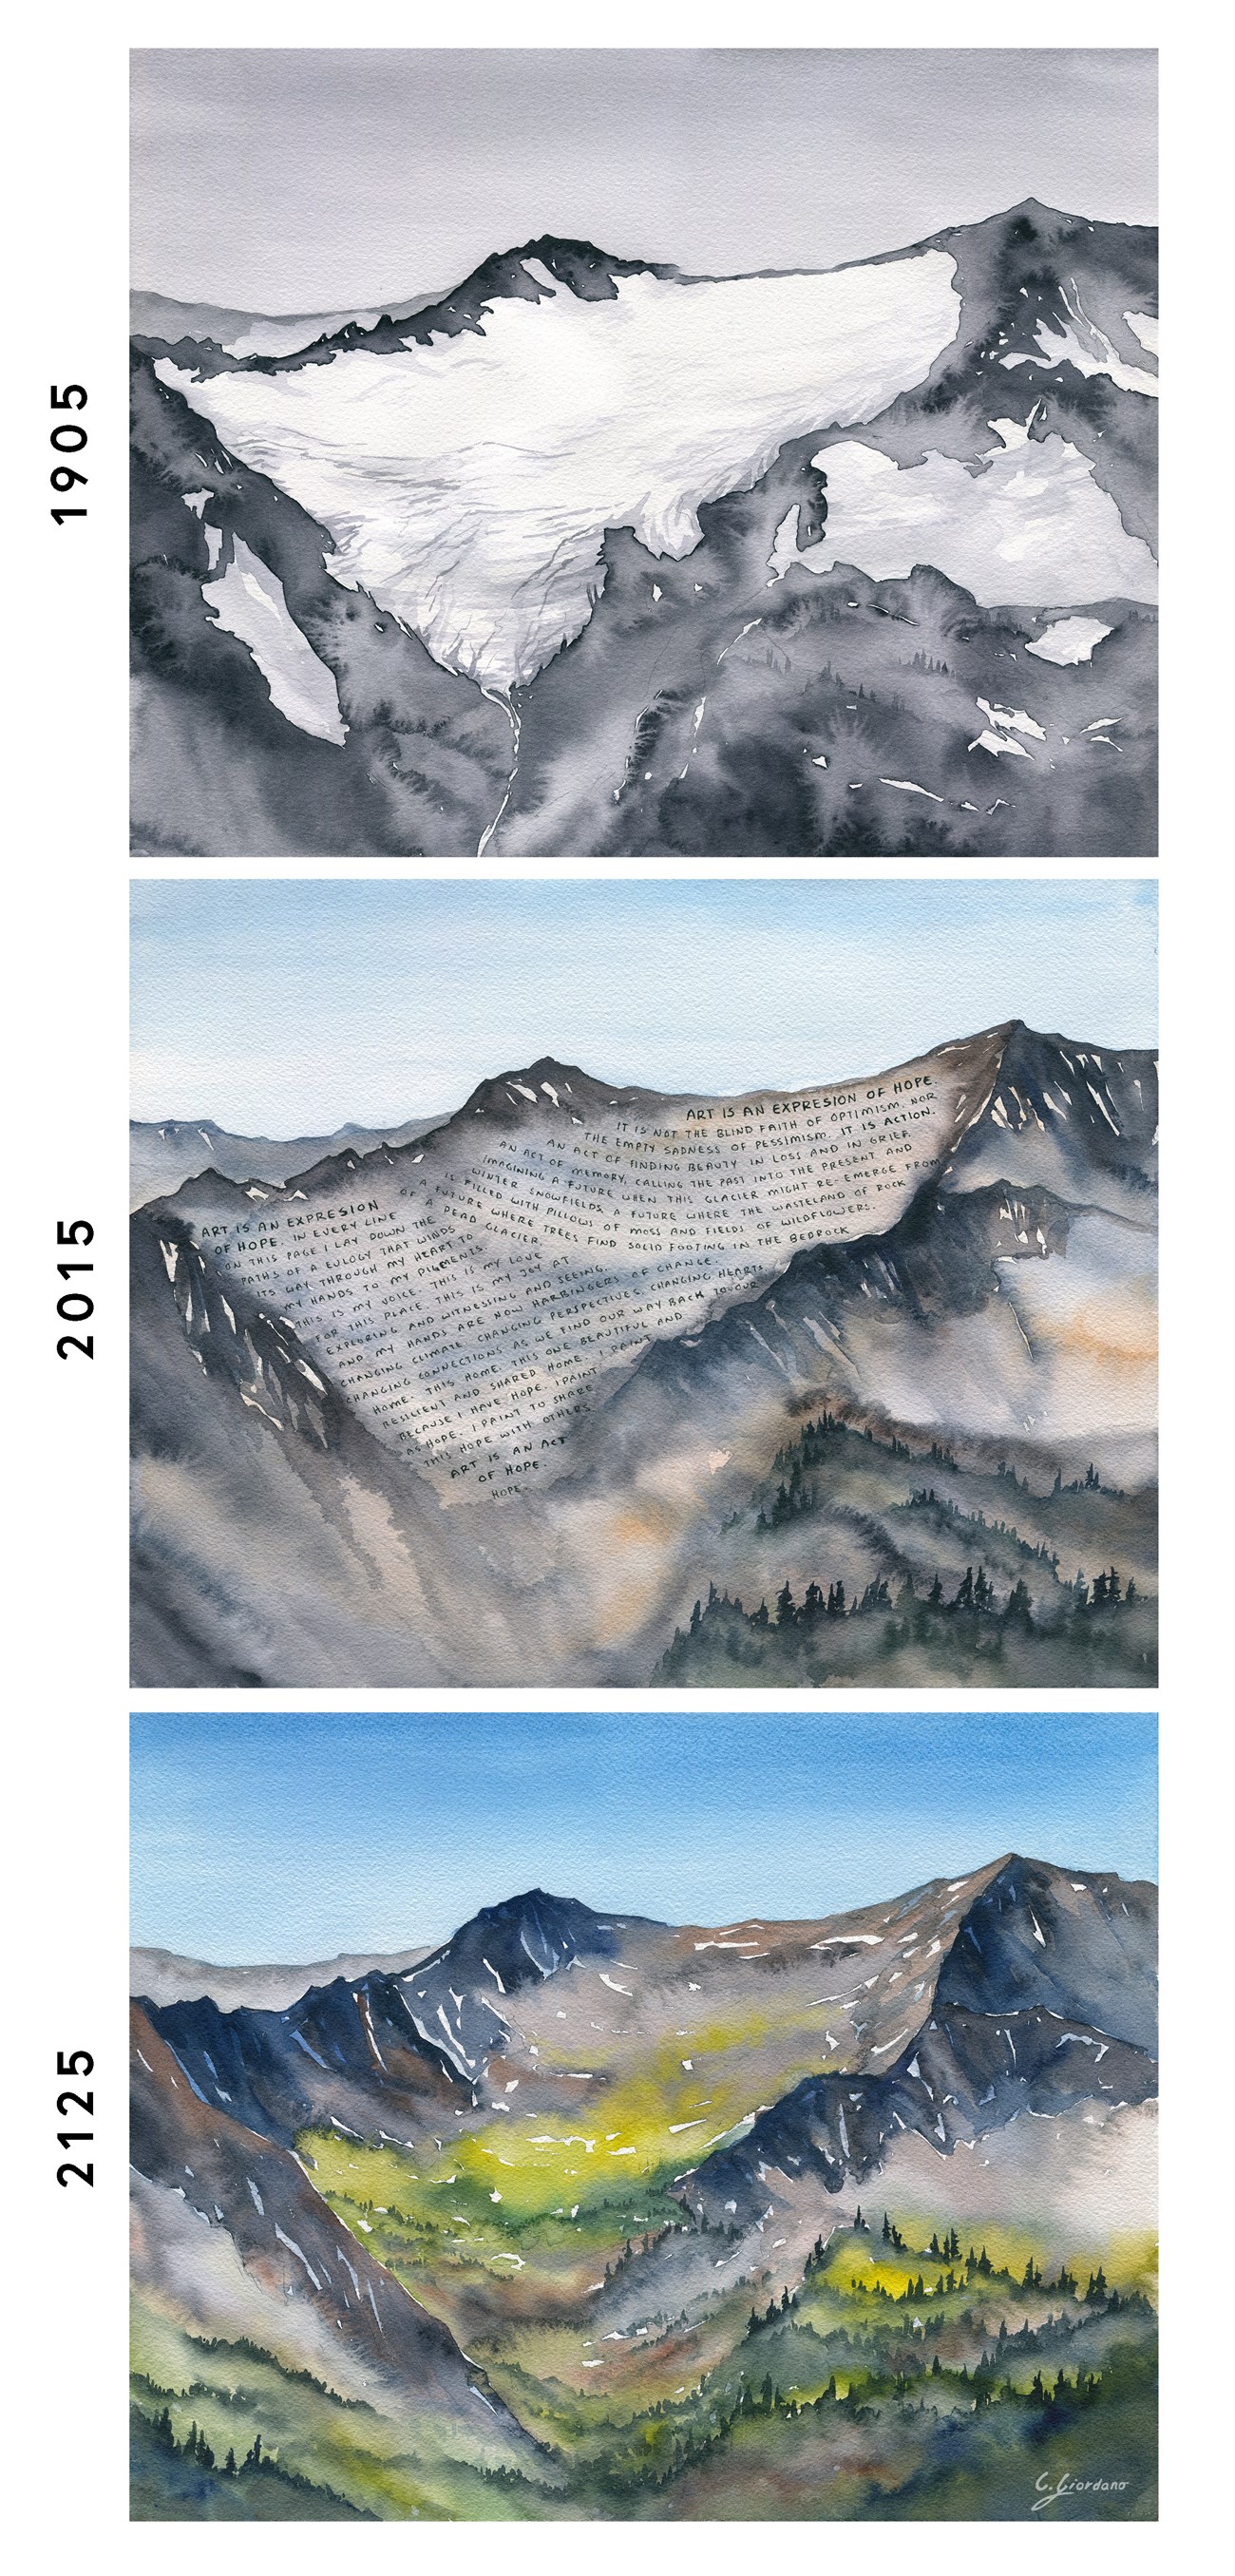 A series of three watercolor paintings of the same mountaintop. The first crowned with a glacier, the second with hand-written words filling the glacier's blurred image, and the third with the glacier fully vanished, a green meadow creeping into its place